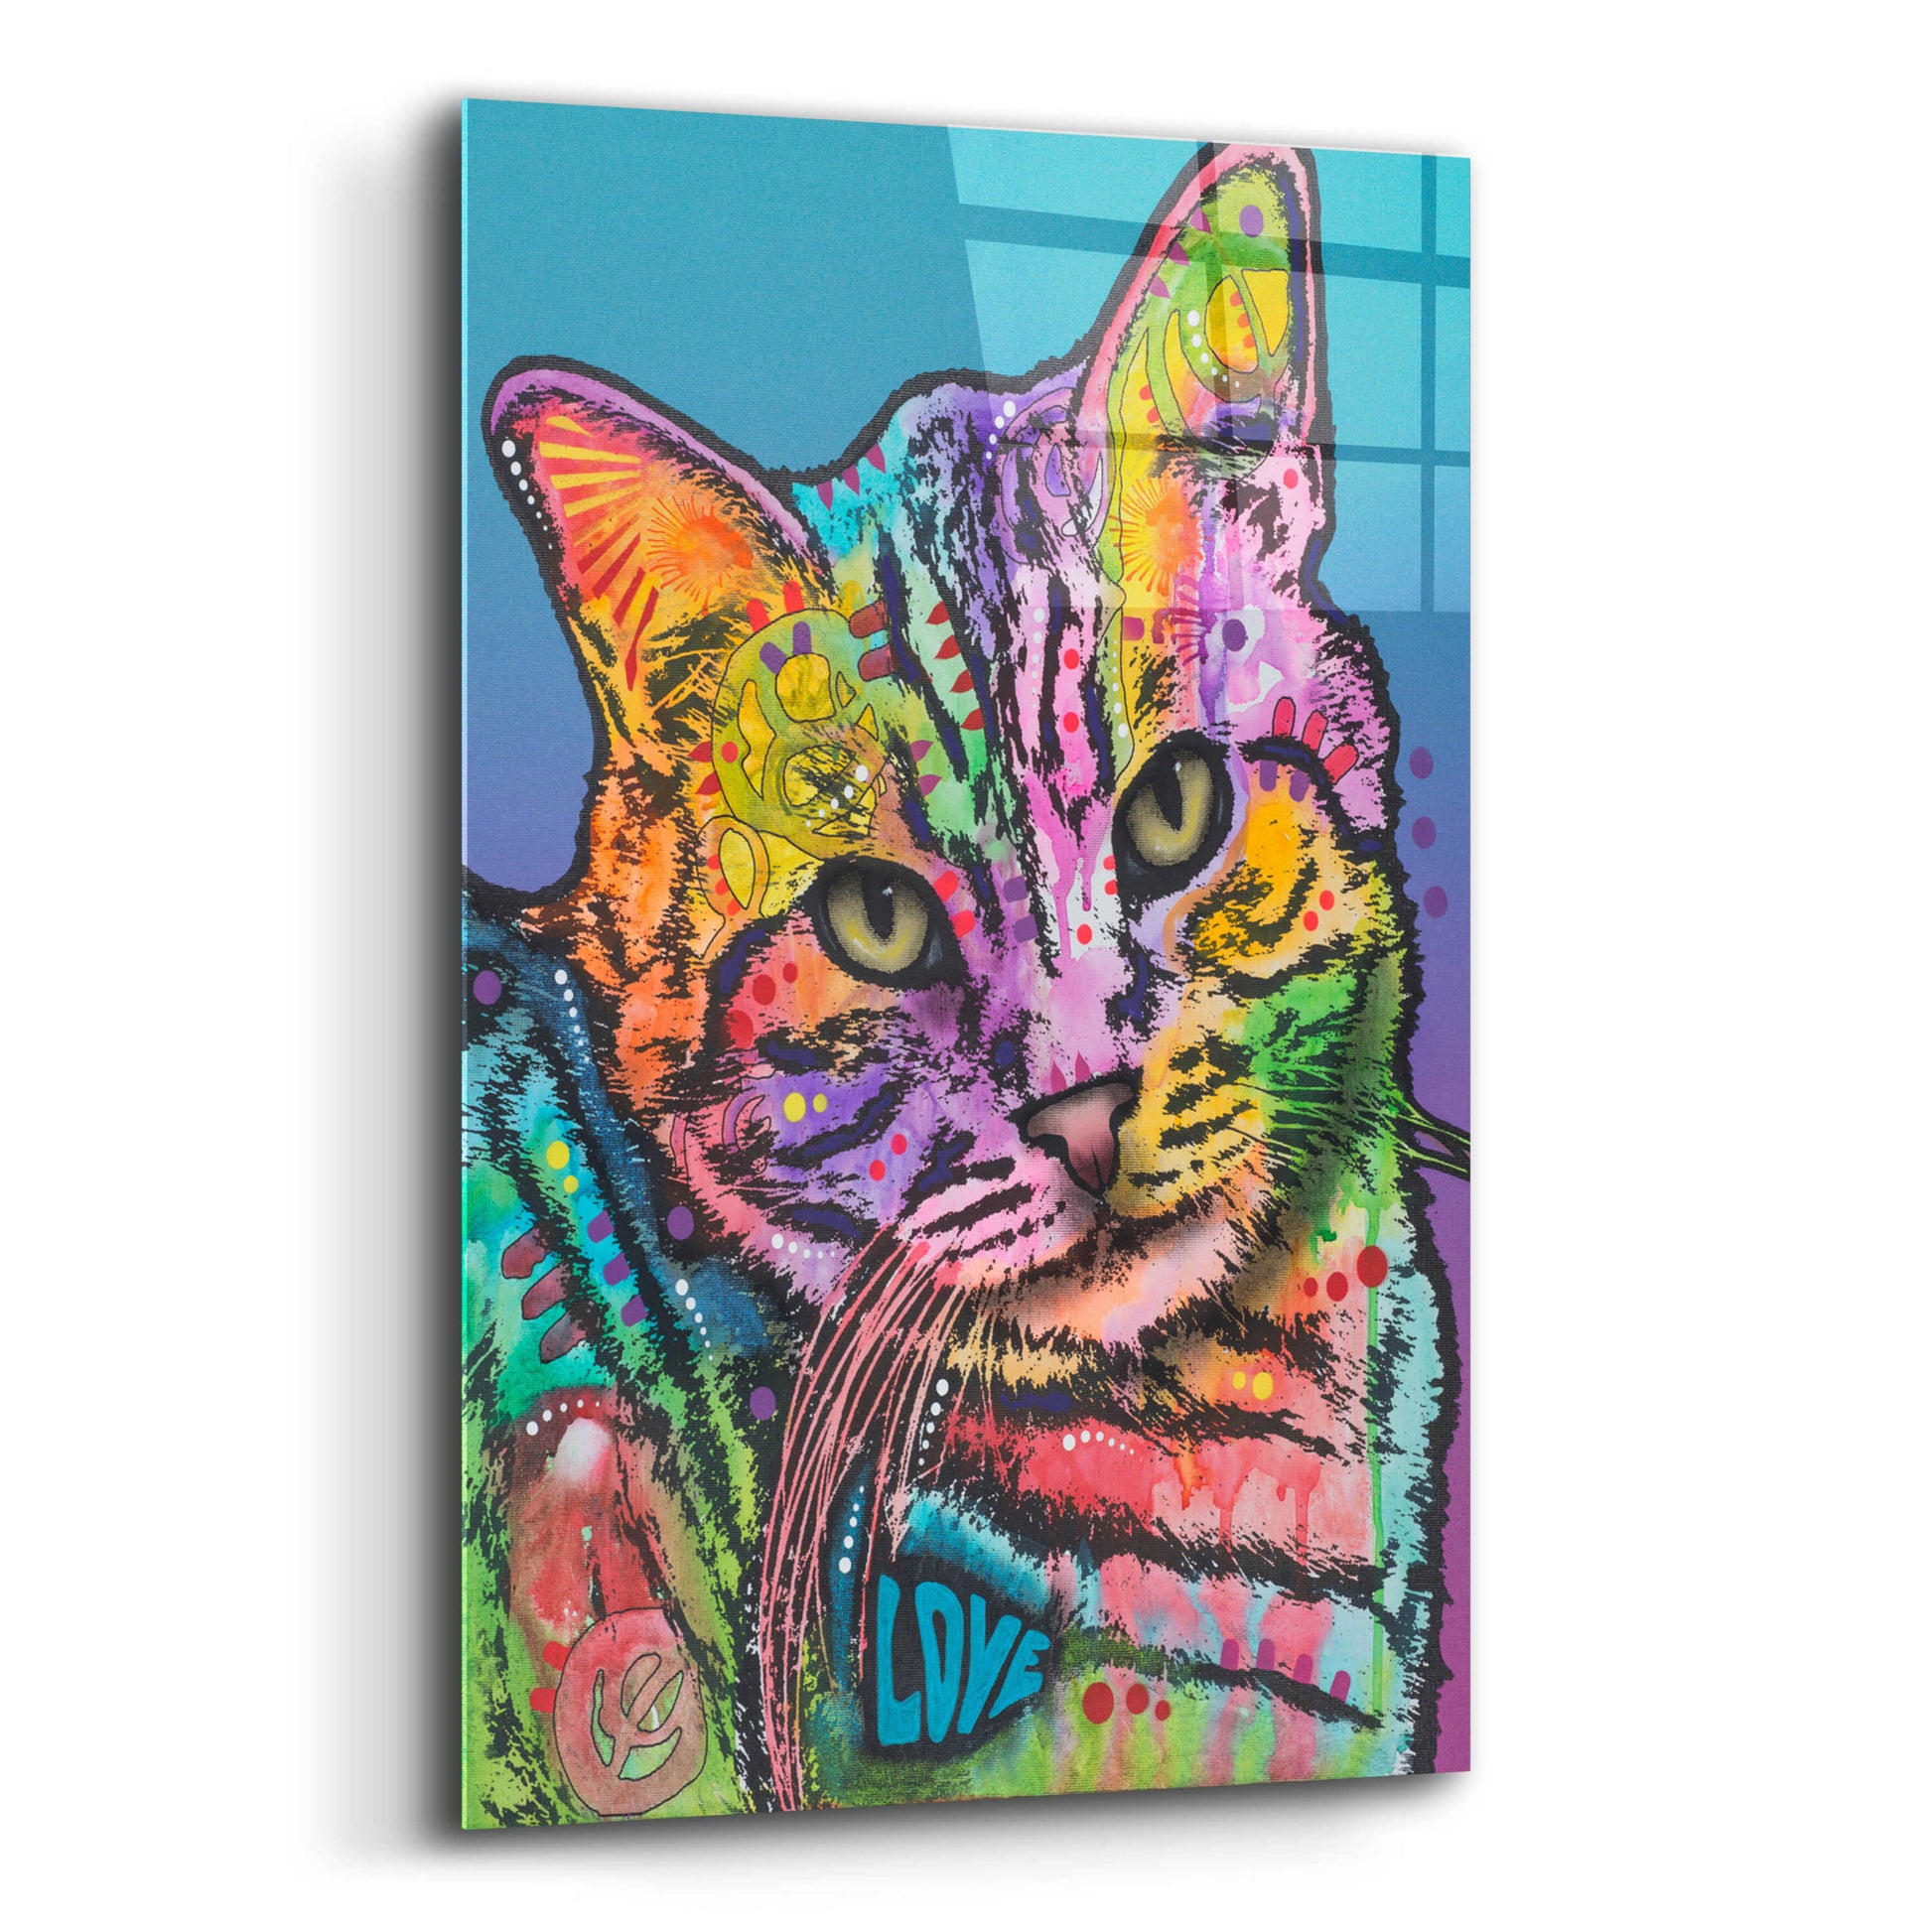 Epic Art 'Tigger' by Dean Russo, Acrylic Glass Wall Art,12x16